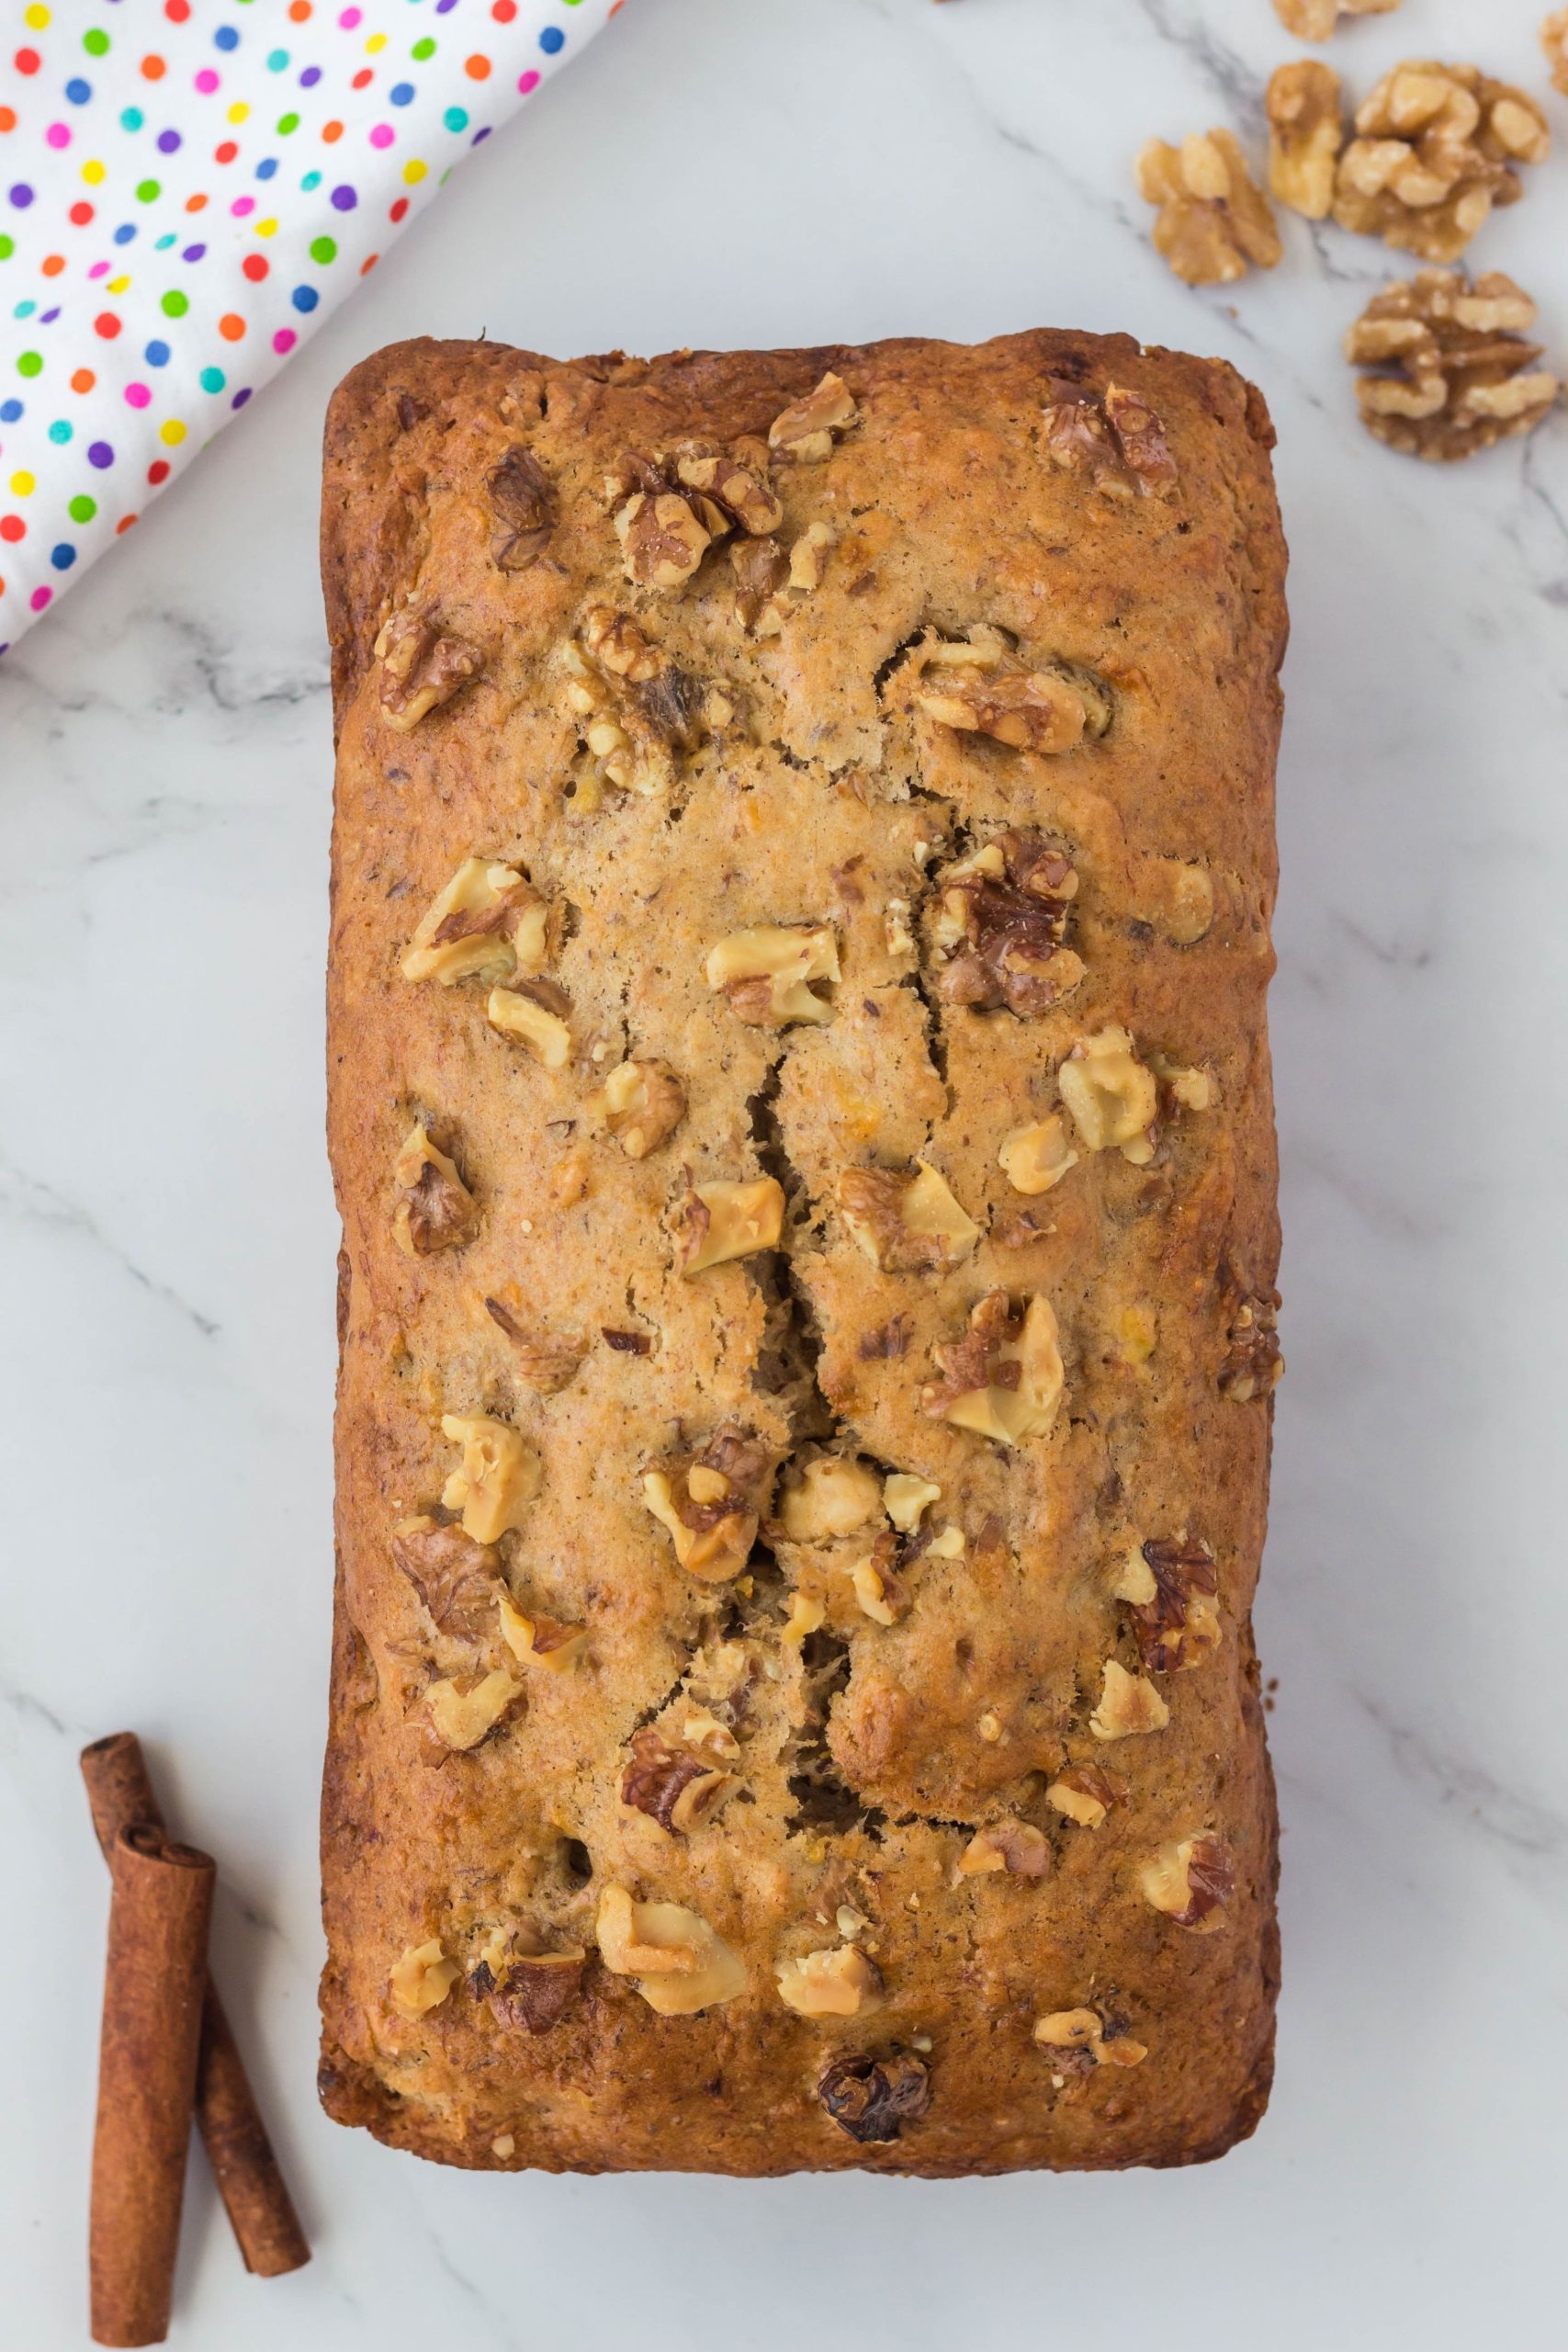 This is the Best Vegan Banana Bread recipe ever! A little bit sweet, moist, and with a hint of vanilla this Vegan Banana Bread Recipe will be your new go-to recipe! #veganbananabread #veganquickbread #veganbaking #eggfreebananabread